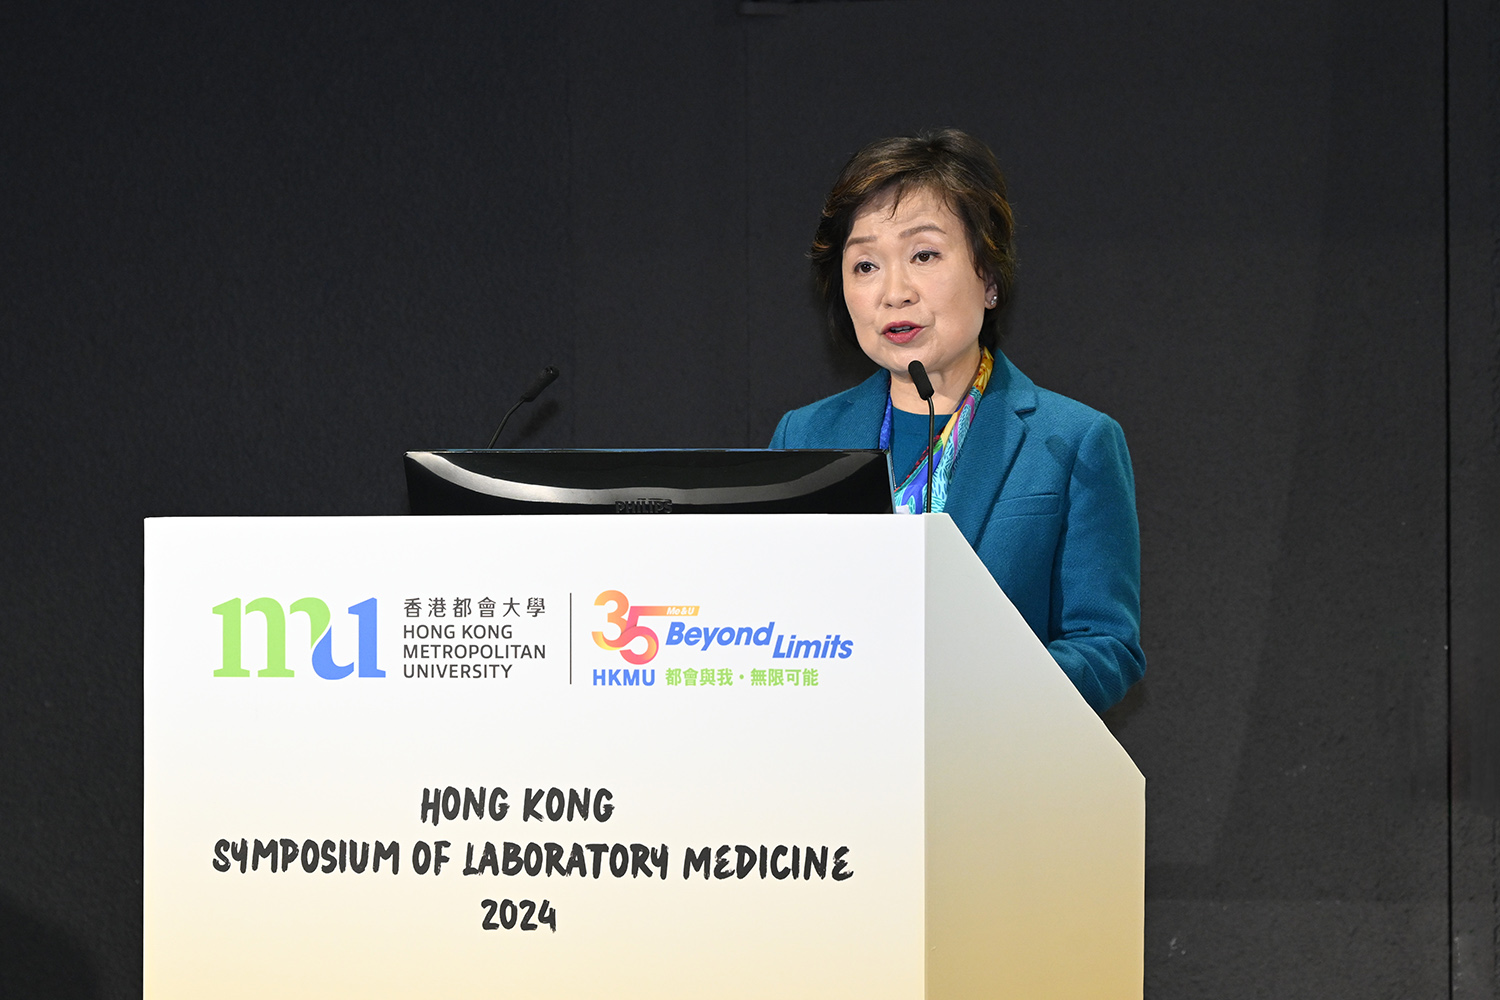 Secretary for Education Dr Choi Yuk-lin said that the Bureau will continue to work closely with HKMU to provide multiple pathways for young people.